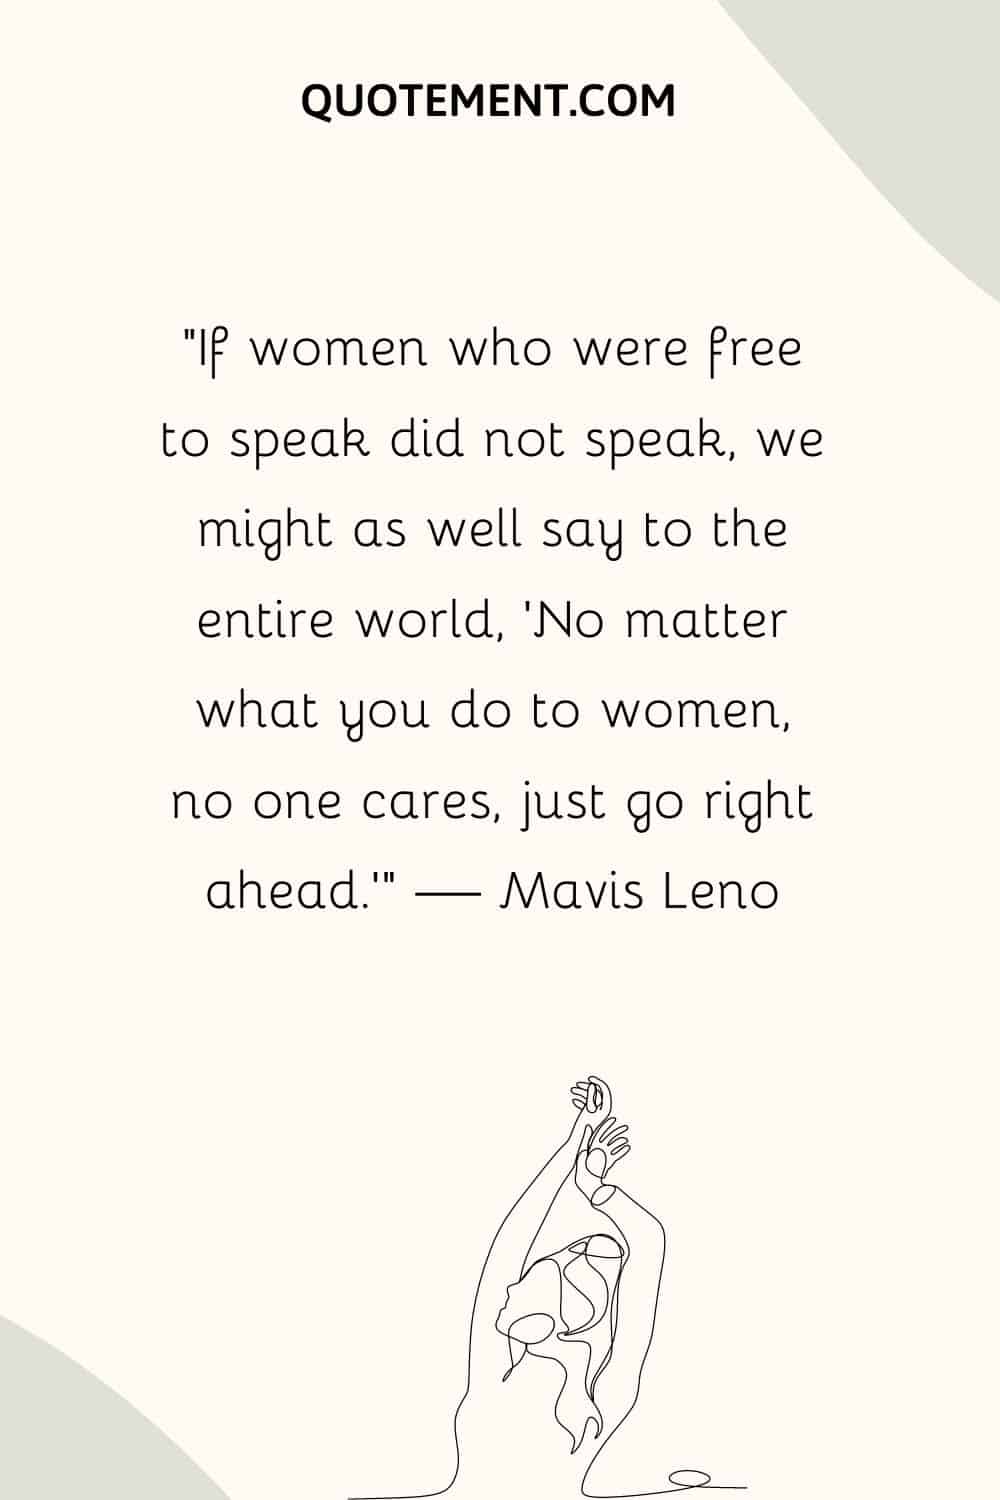 If women who were free to speak did not speak, we might as well say to the entire world, 'No matter what you do to women, no one cares, just go right ahead